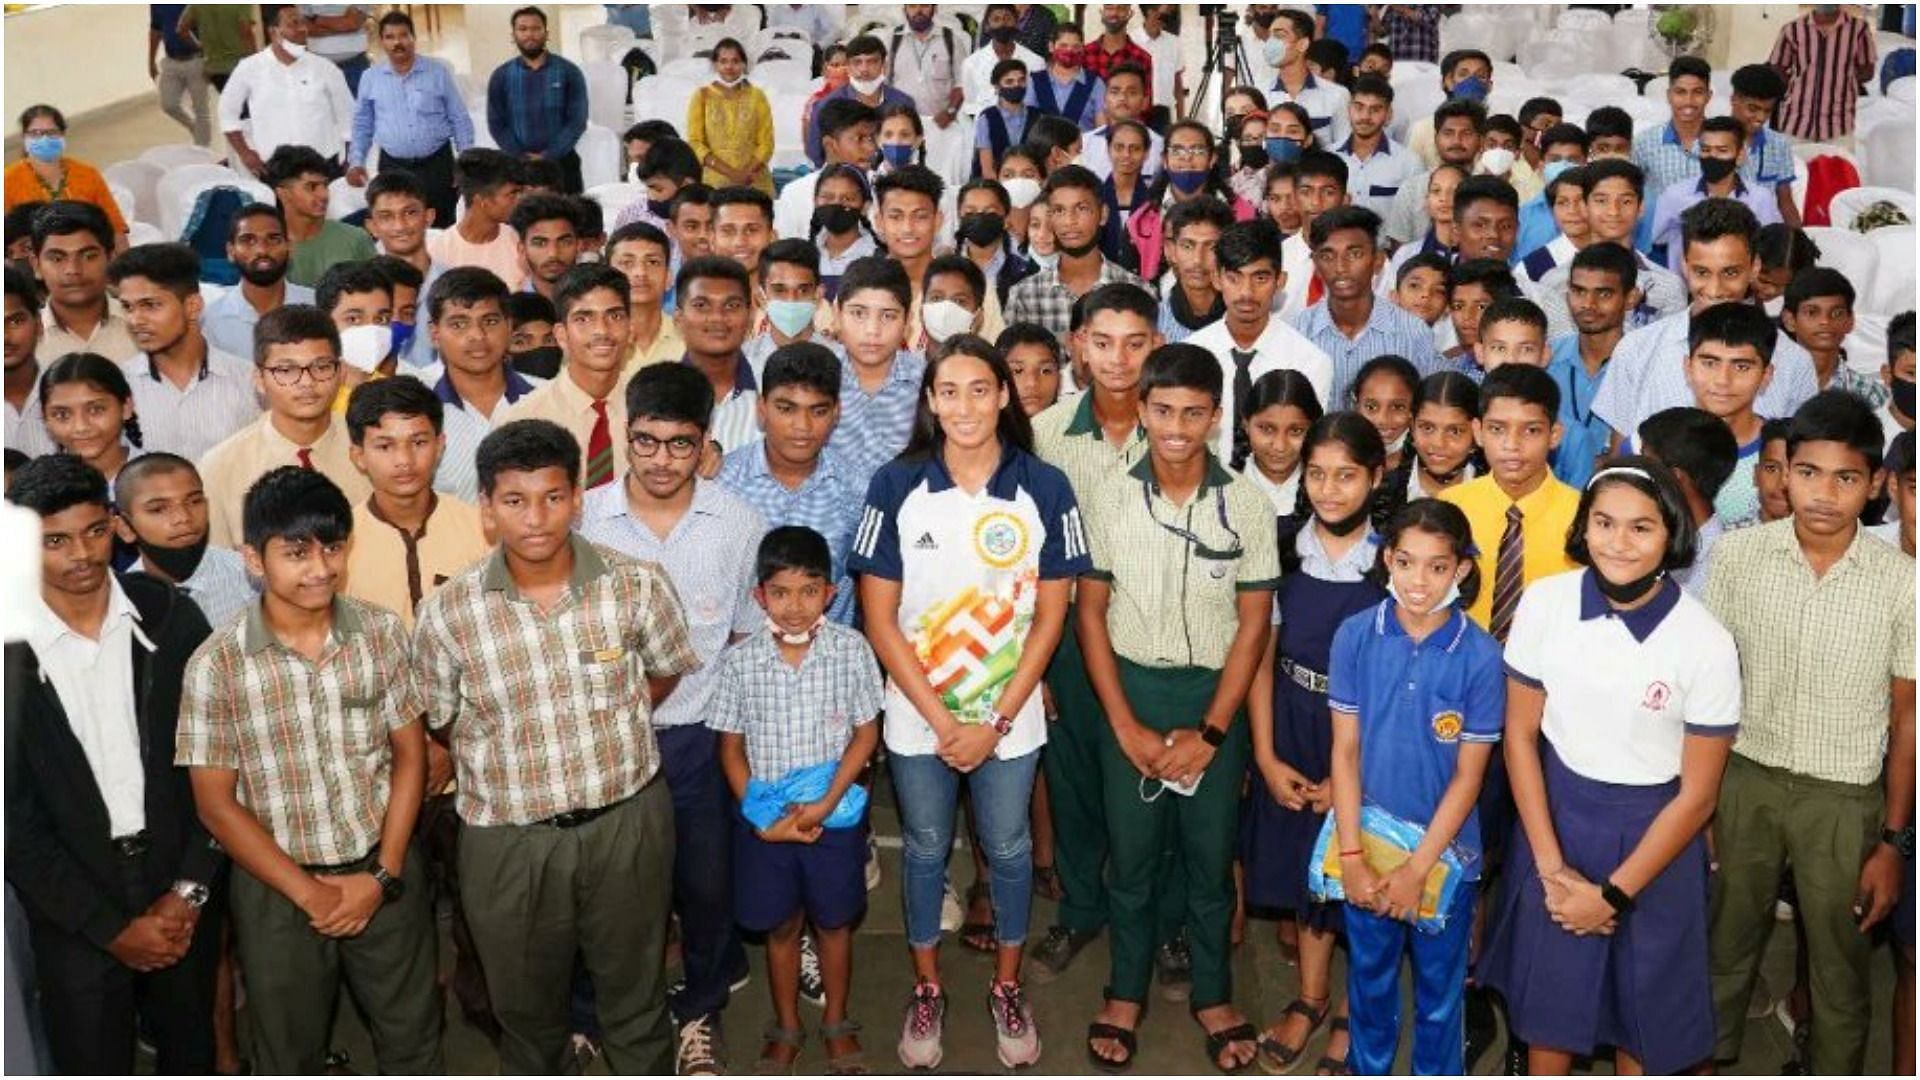 &#039;Meet the Champions&#039;: Maana Patel with students (Pic Credit: SAI)